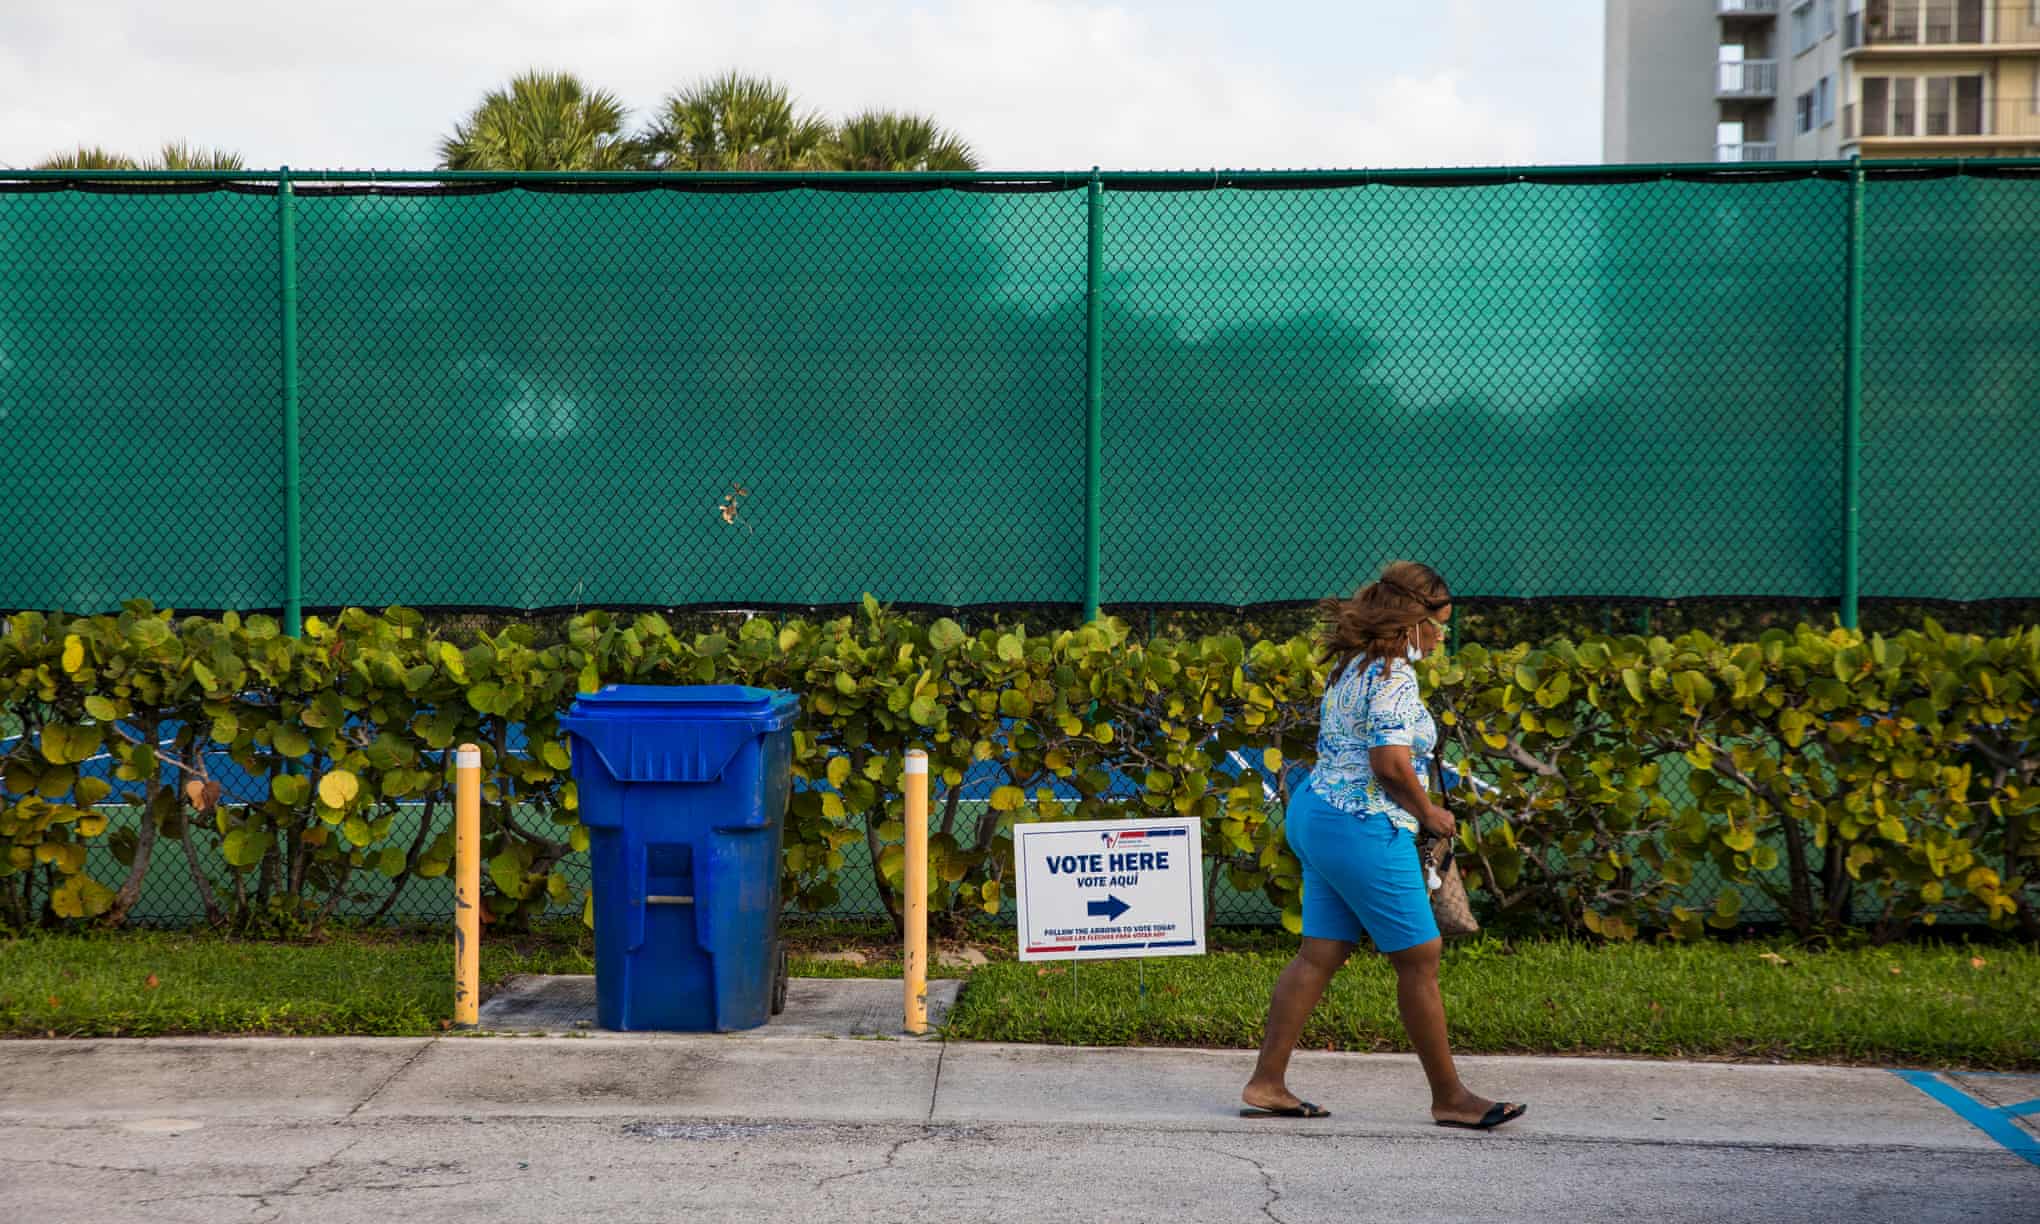 ‘A dangerous trend’: Florida Republicans poised to pass more voter restrictions (theguardian.com)